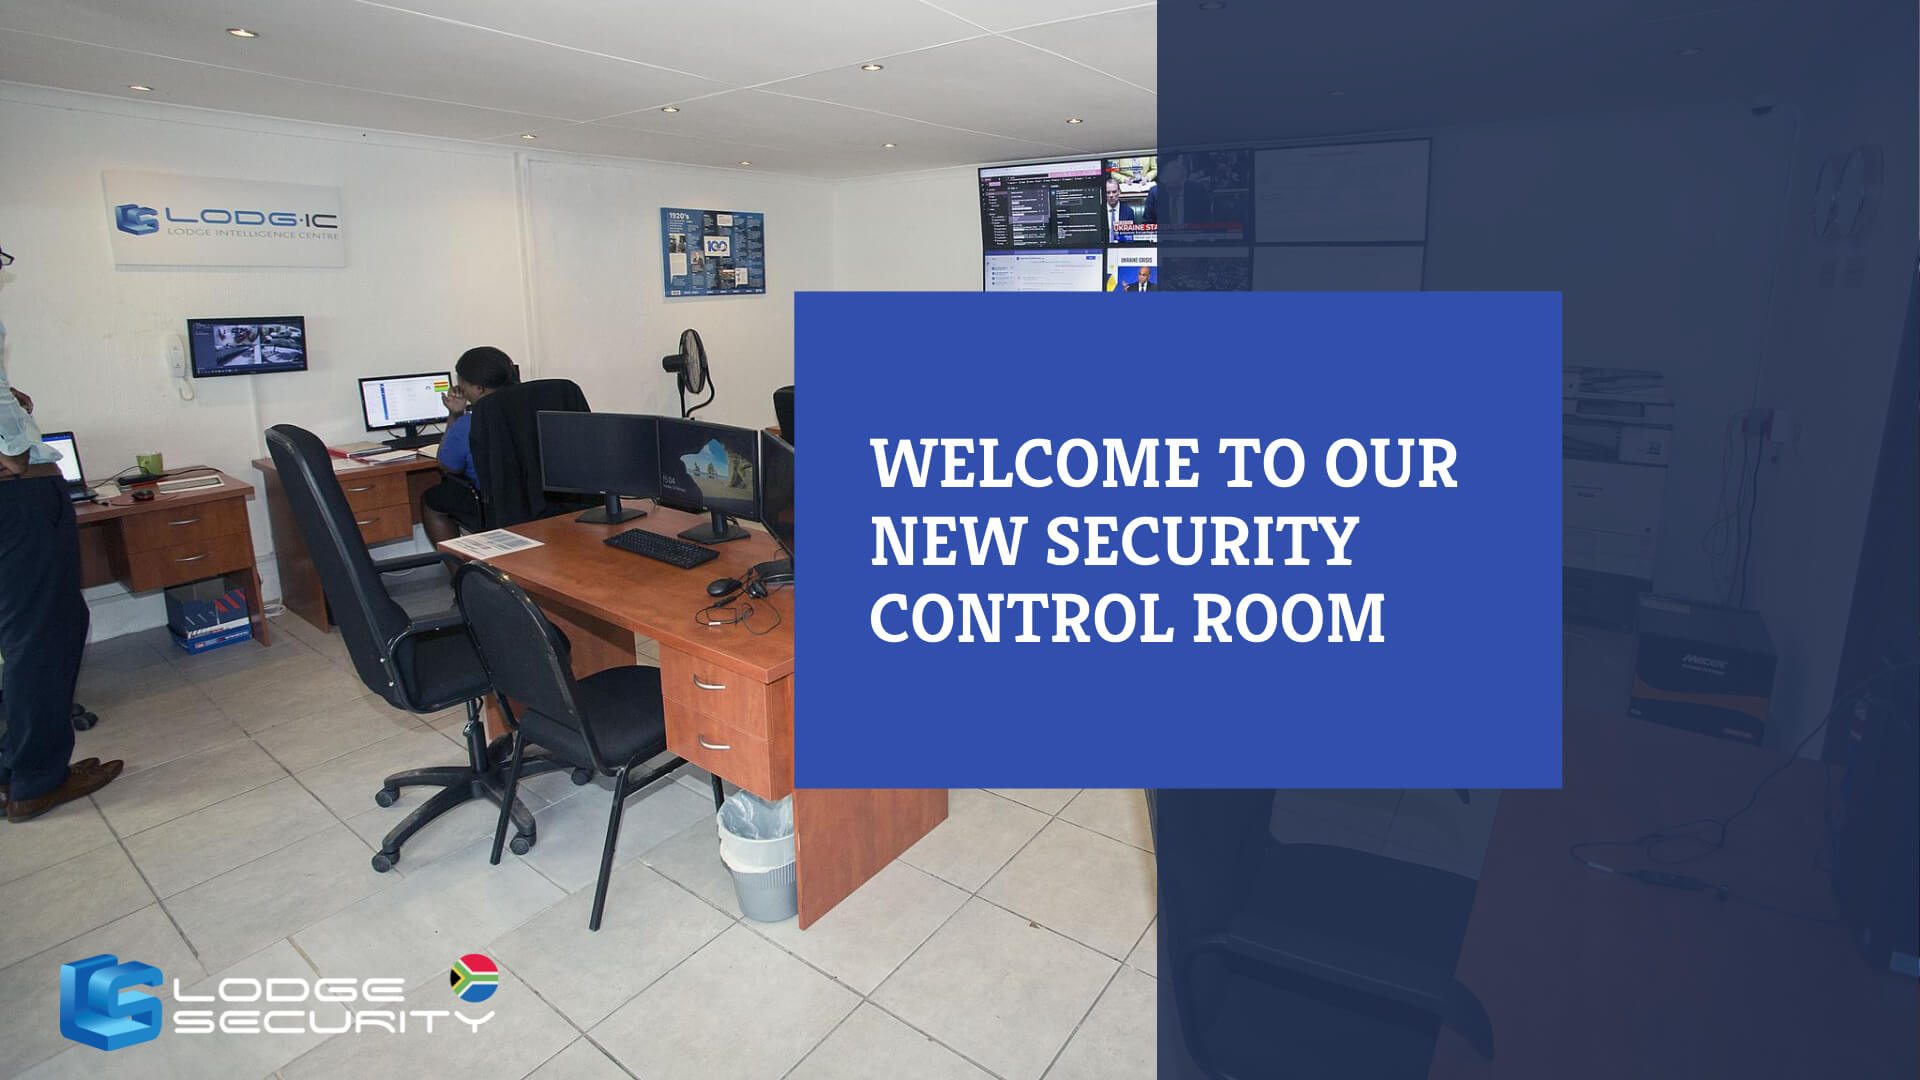 Our new control room – Lodge Security South Africa